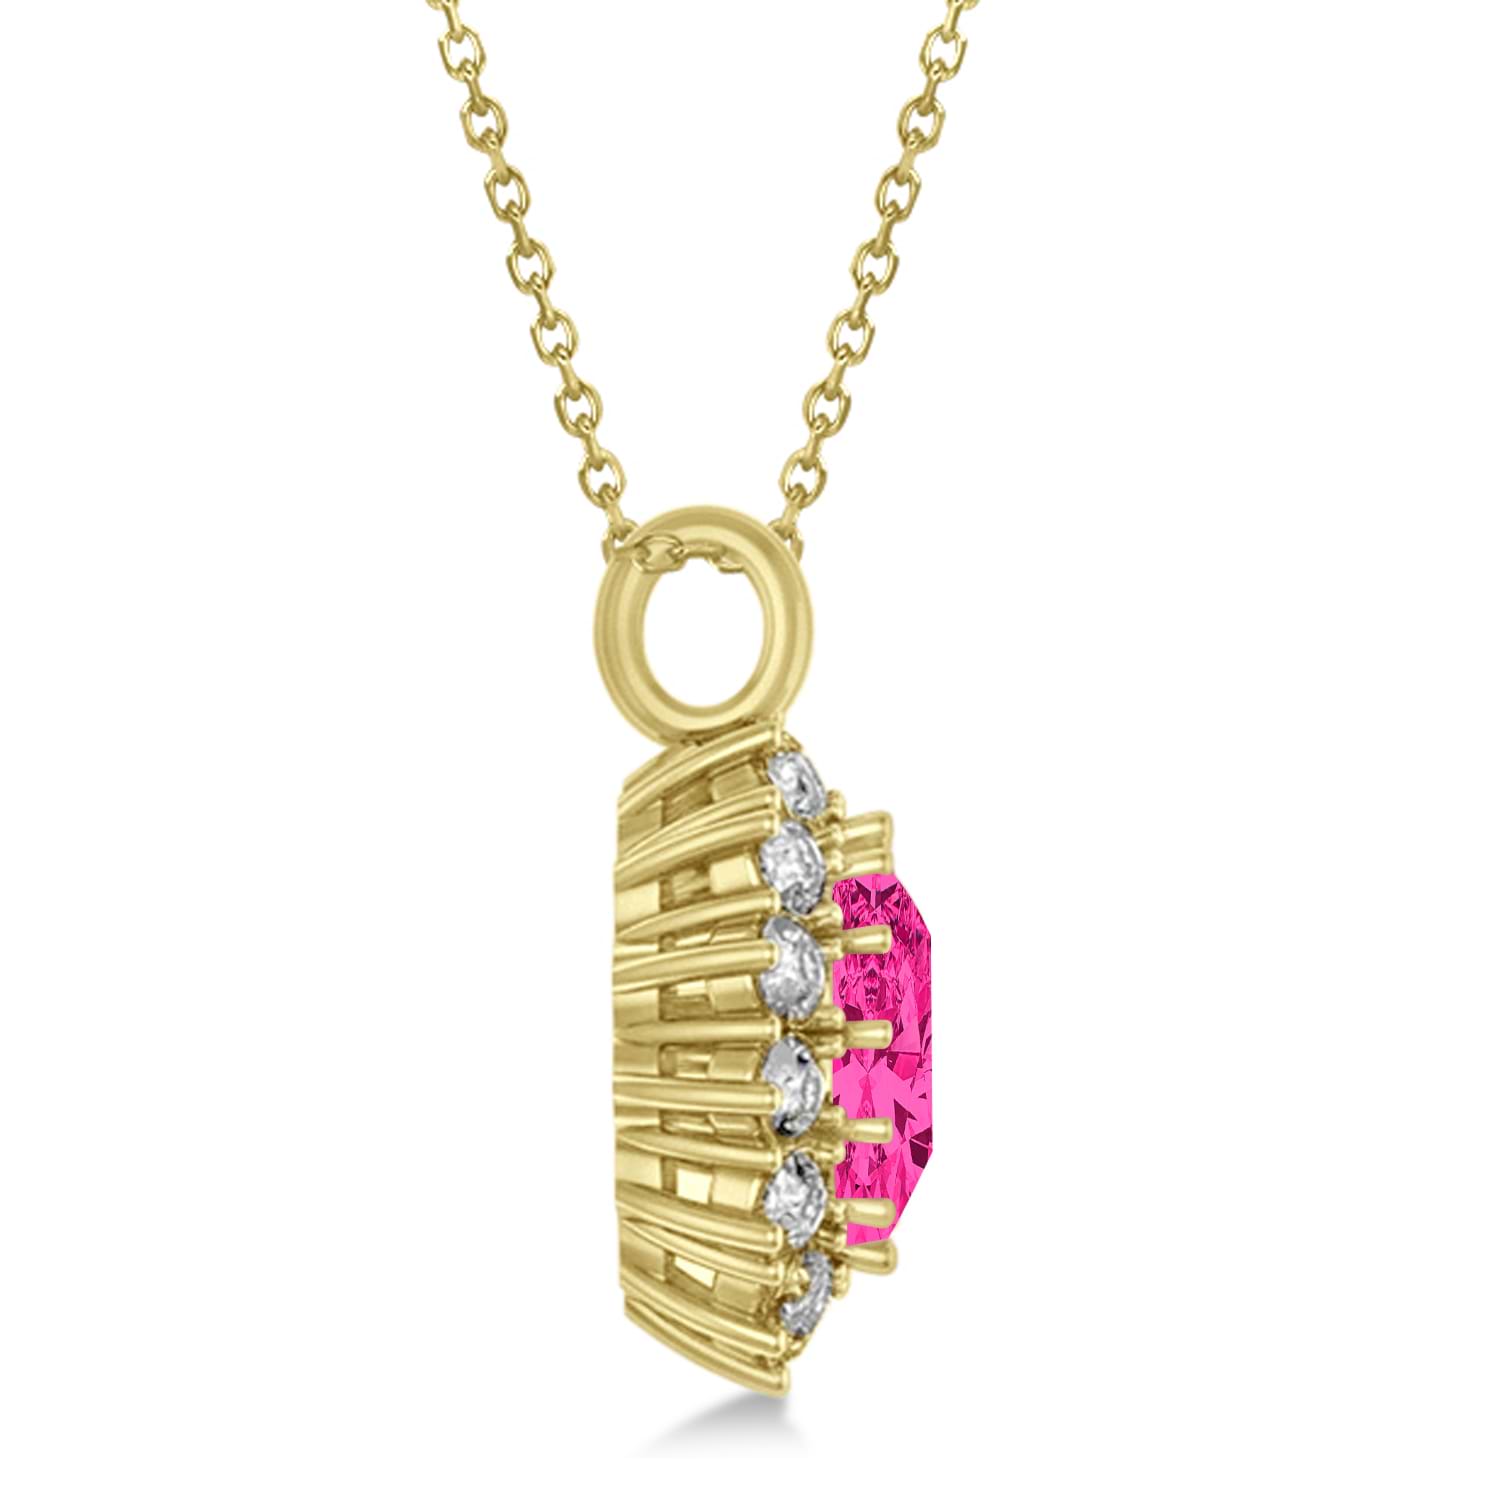 Oval Pink Tourmaline and Diamond Pendant Necklace 14k Yellow Gold (5.40ctw)